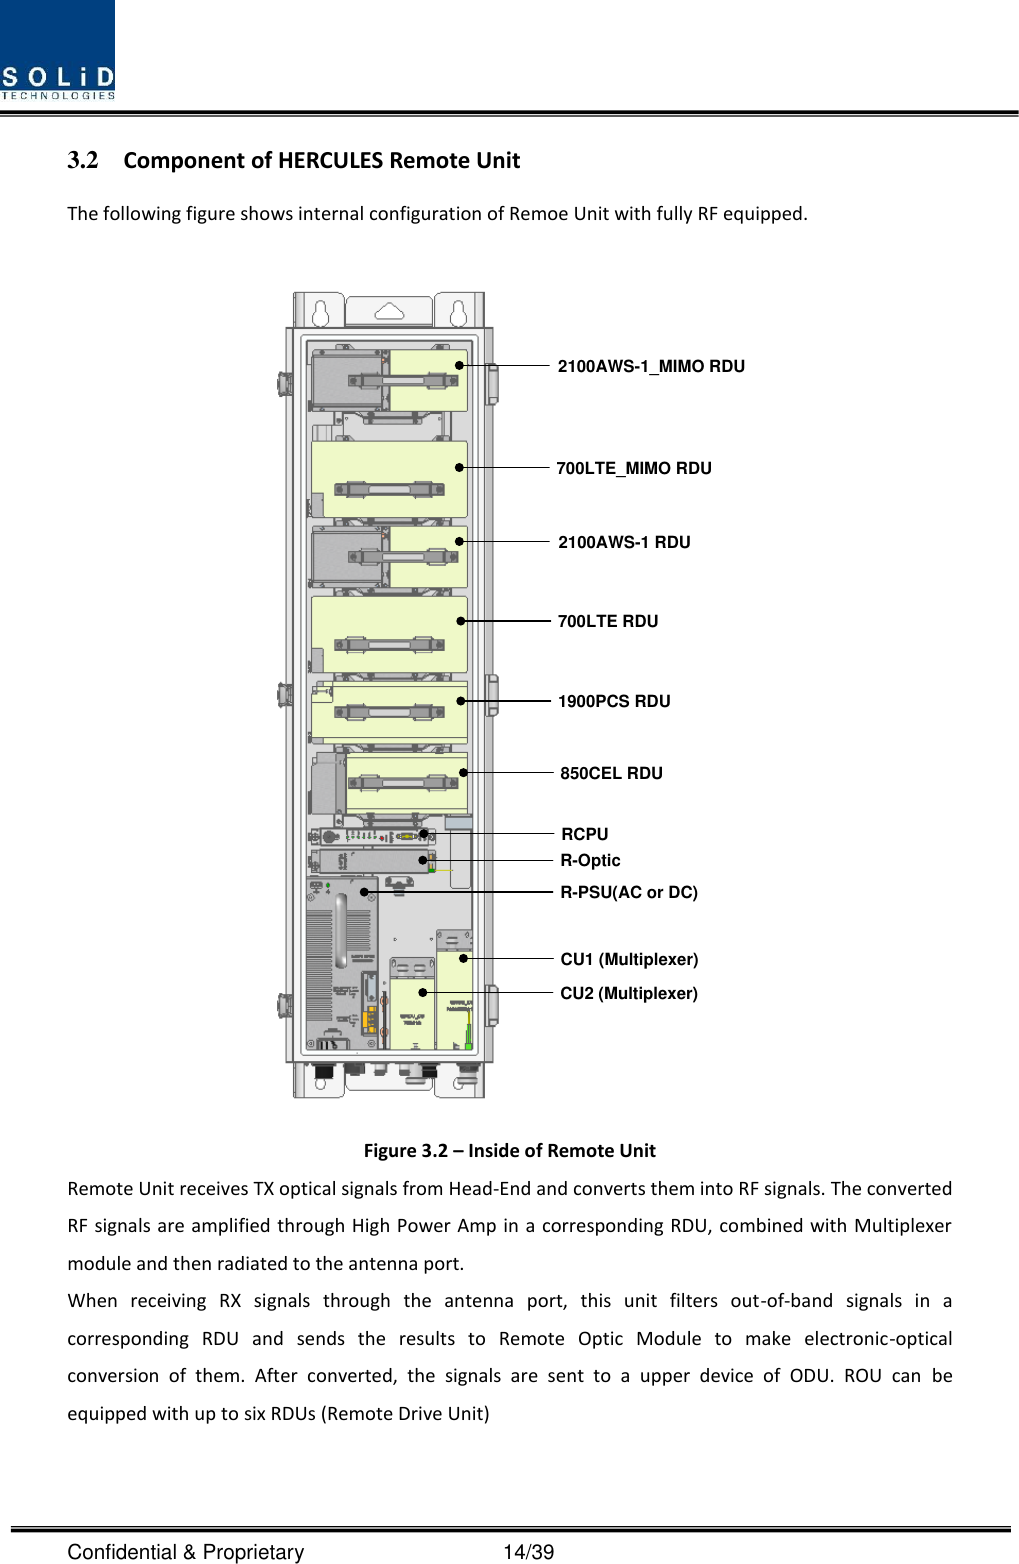  Confidential &amp; Proprietary                                      14/39 3.2 Component of HERCULES Remote Unit The following figure shows internal configuration of Remoe Unit with fully RF equipped.  2100AWS-1_MIMO RDU700LTE_MIMO RDU2100AWS-1 RDU700LTE RDU1900PCS RDU850CEL RDURCPUR-OpticR-PSU(AC or DC)CU1 (Multiplexer)CU2 (Multiplexer) Figure 3.2 – Inside of Remote Unit Remote Unit receives TX optical signals from Head-End and converts them into RF signals. The converted RF signals are amplified through High Power Amp in a corresponding RDU, combined with Multiplexer module and then radiated to the antenna port. When  receiving  RX  signals  through  the  antenna  port,  this  unit  filters  out-of-band  signals  in  a corresponding  RDU  and  sends  the  results  to  Remote  Optic  Module  to  make  electronic-optical conversion  of  them.  After  converted,  the  signals  are  sent  to  a  upper  device  of  ODU.  ROU  can  be equipped with up to six RDUs (Remote Drive Unit)     